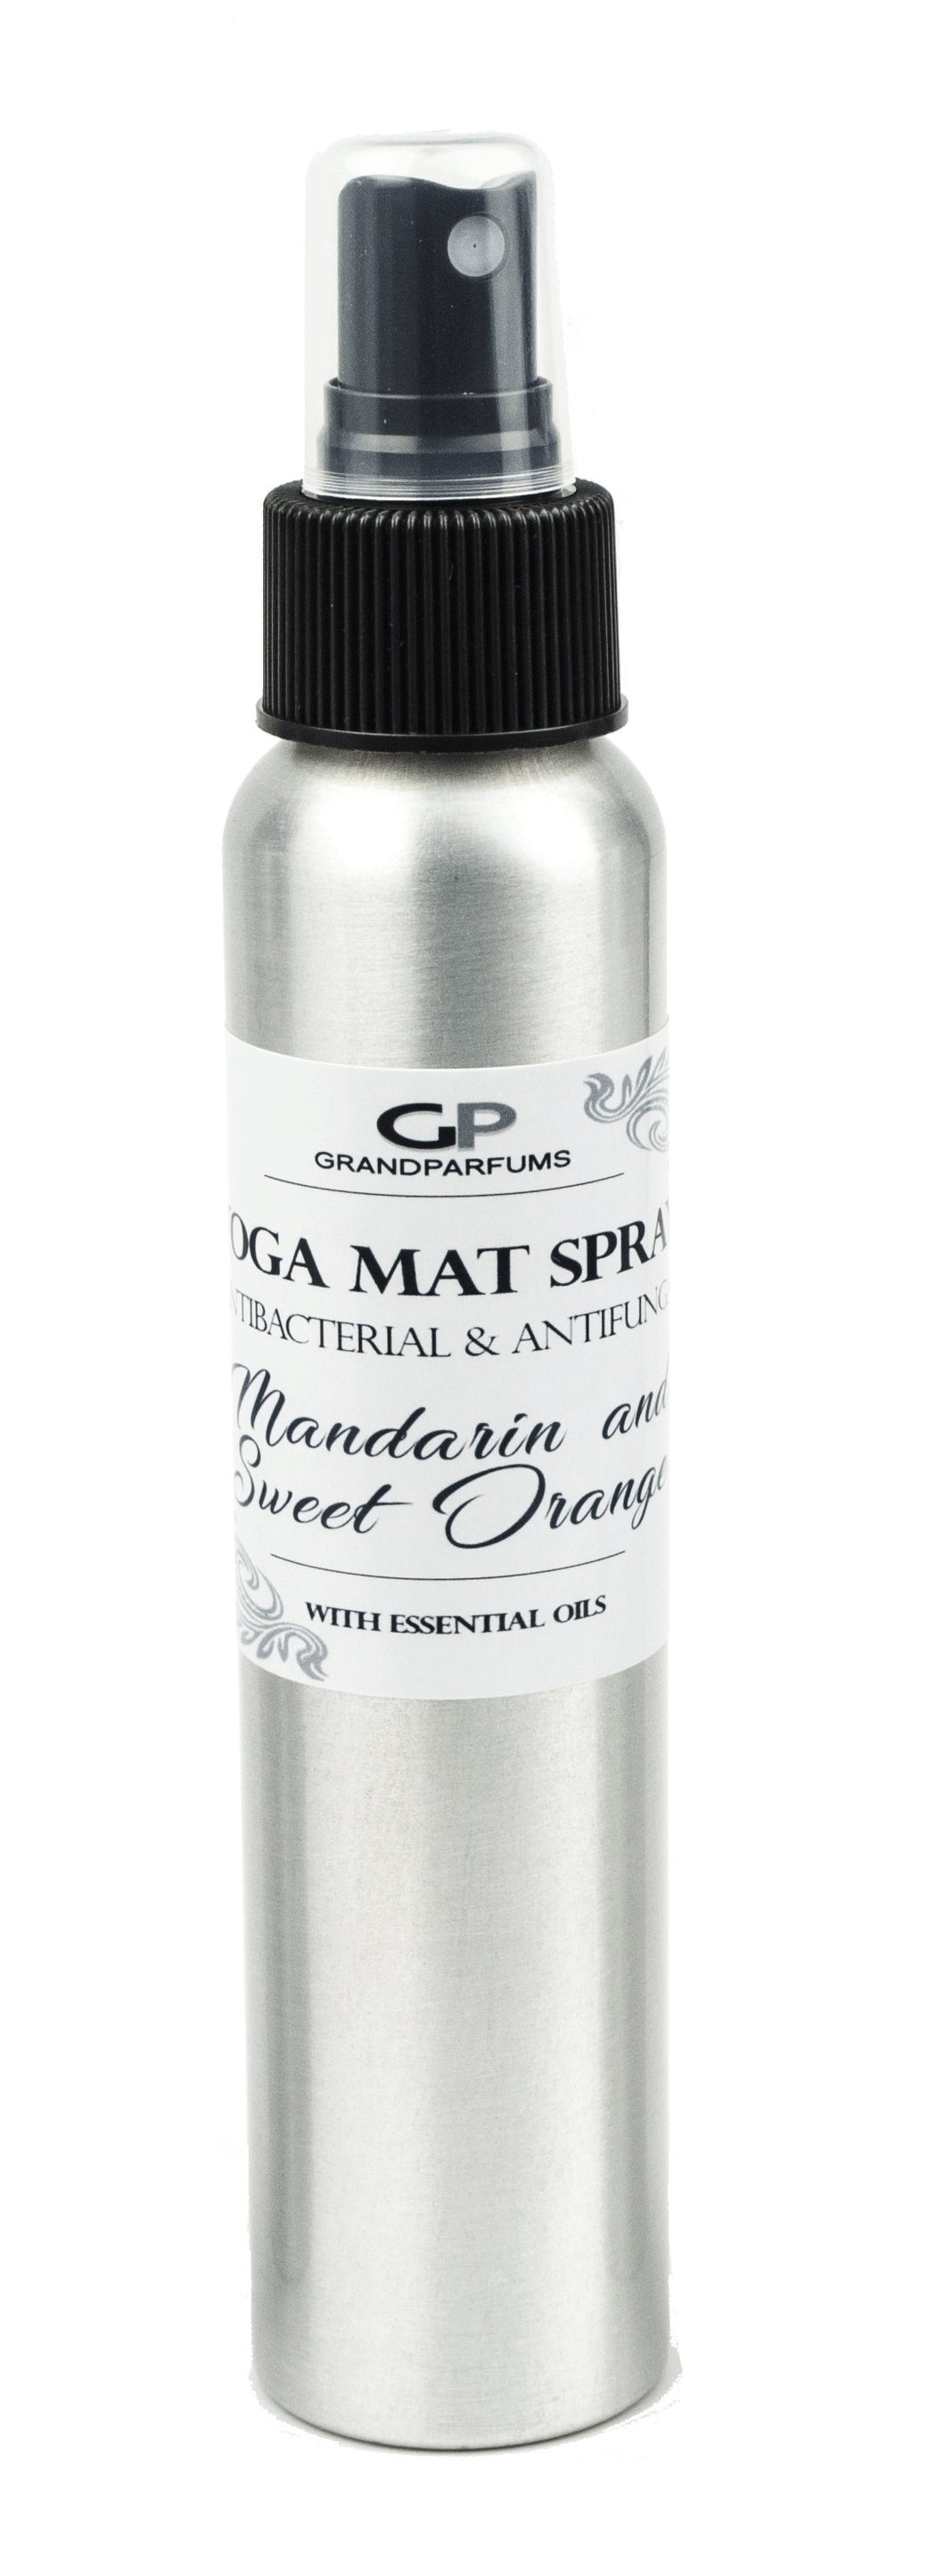 YOGA MAT CLEANSER Mandarin & Sweet Orange Natural Organic Antibacterial Spray Mist With Essential Oils 4 Oz Many Fragrances to Choose From